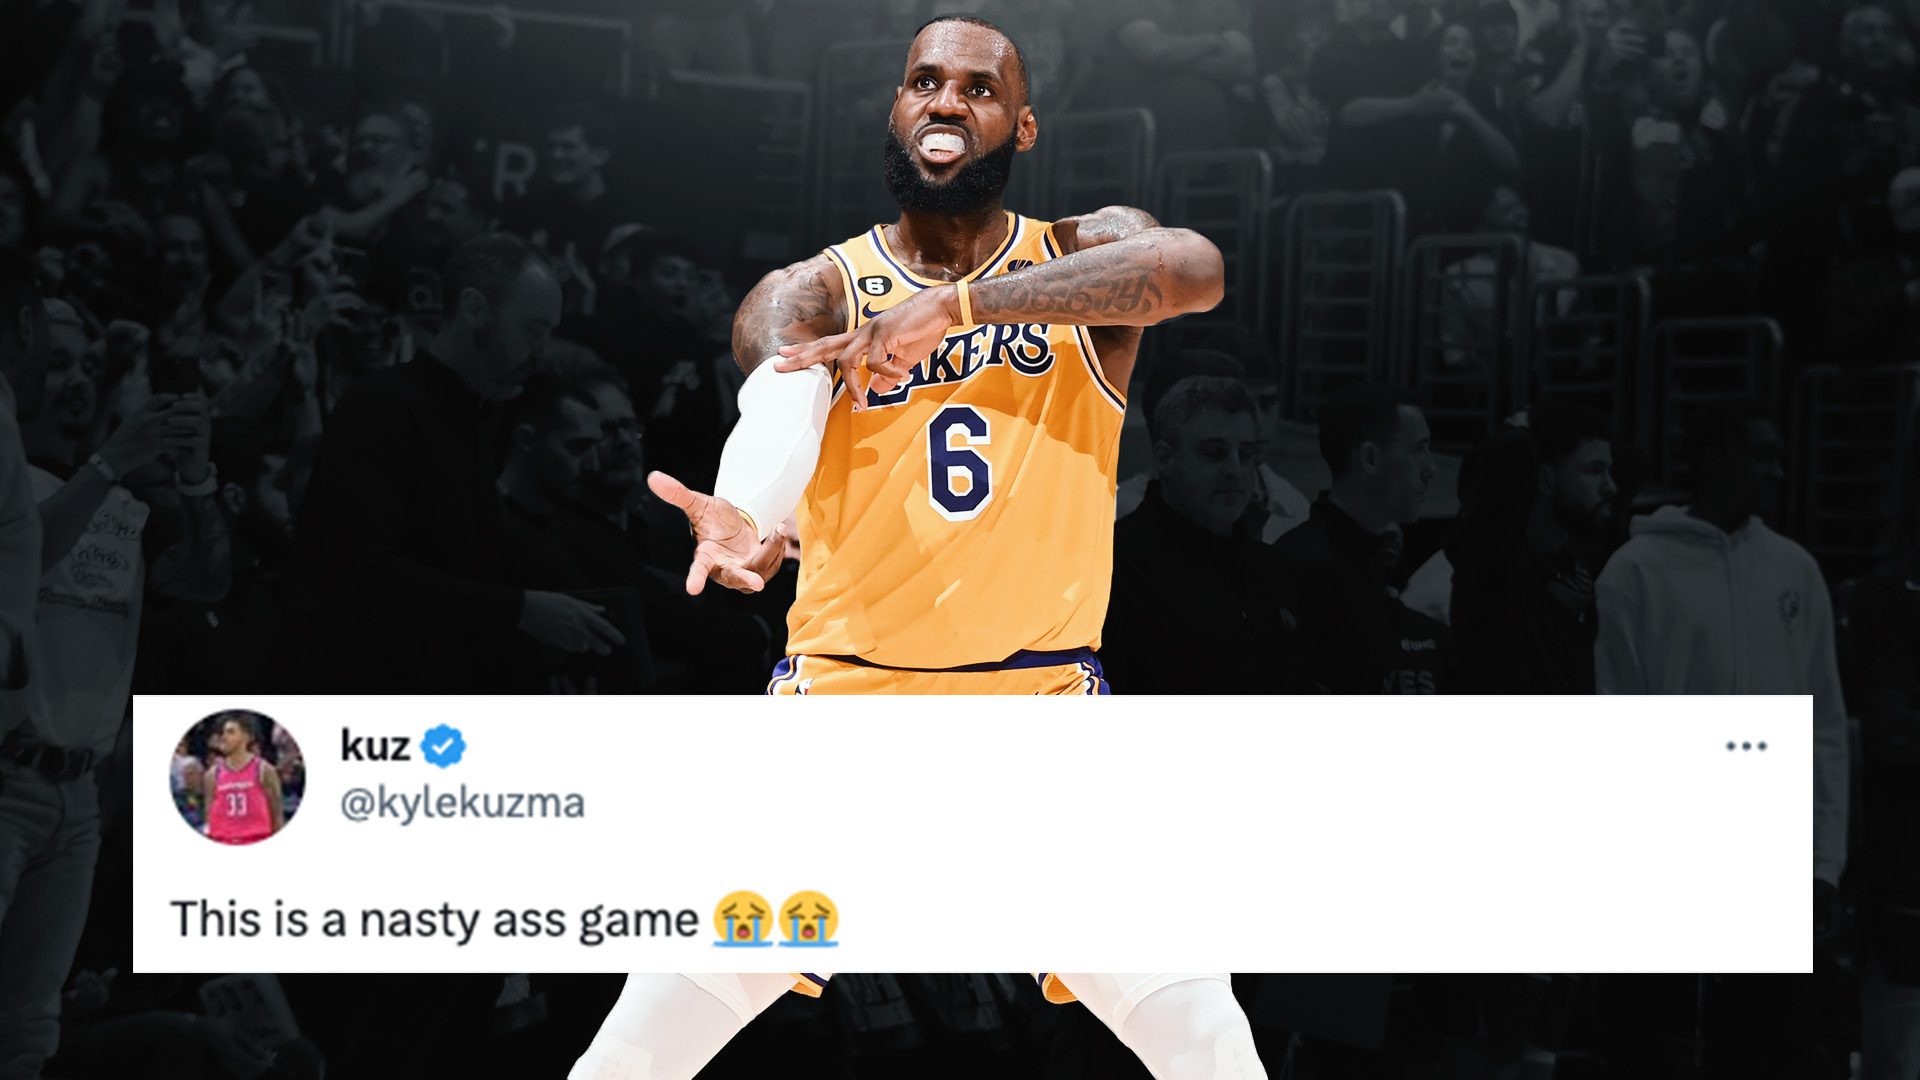 NBA World Reacts to Wild Lakers OT Win That Secured Playoffs Appearance